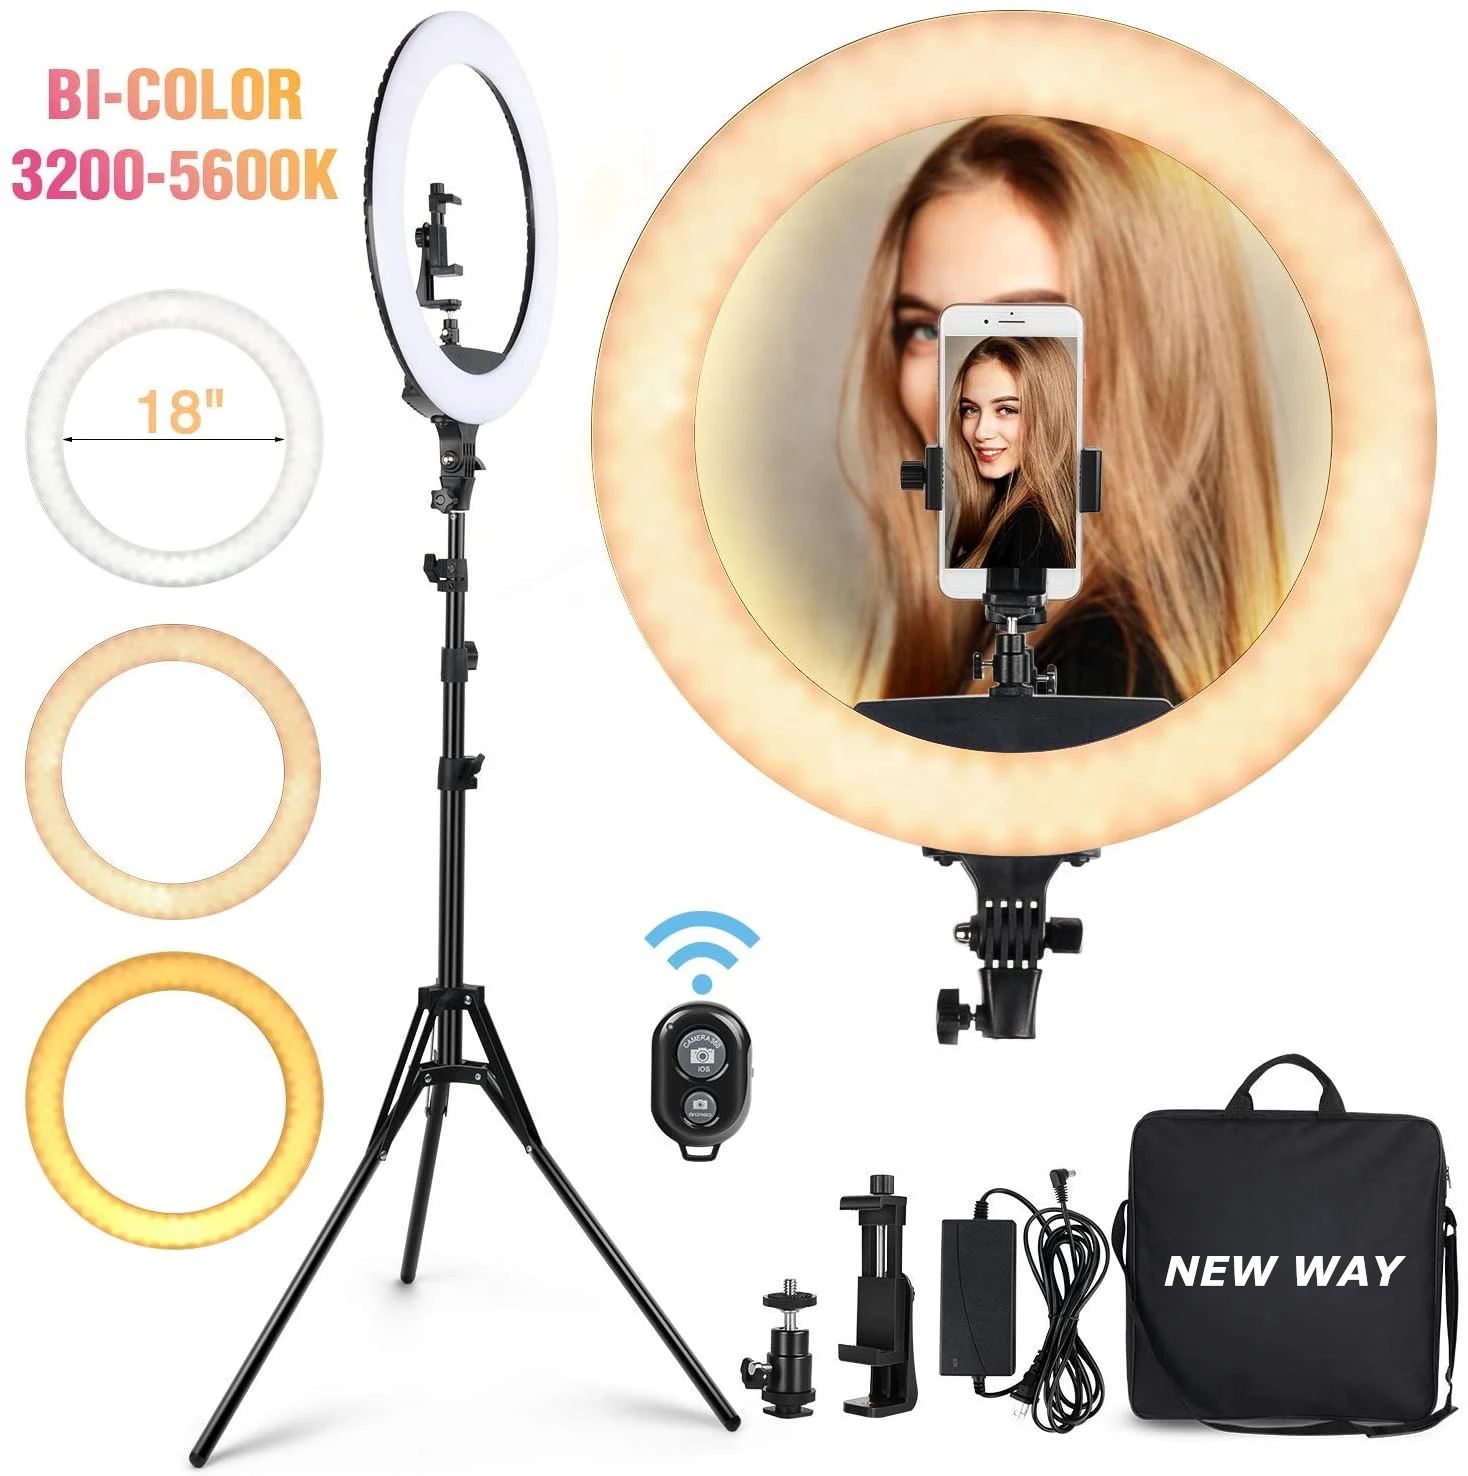 Dimmable Photographic Light 65W Studio Makeup LED Ring Light 18 Inch LED Ringlight Kit with Tripod Stand Phone Holder